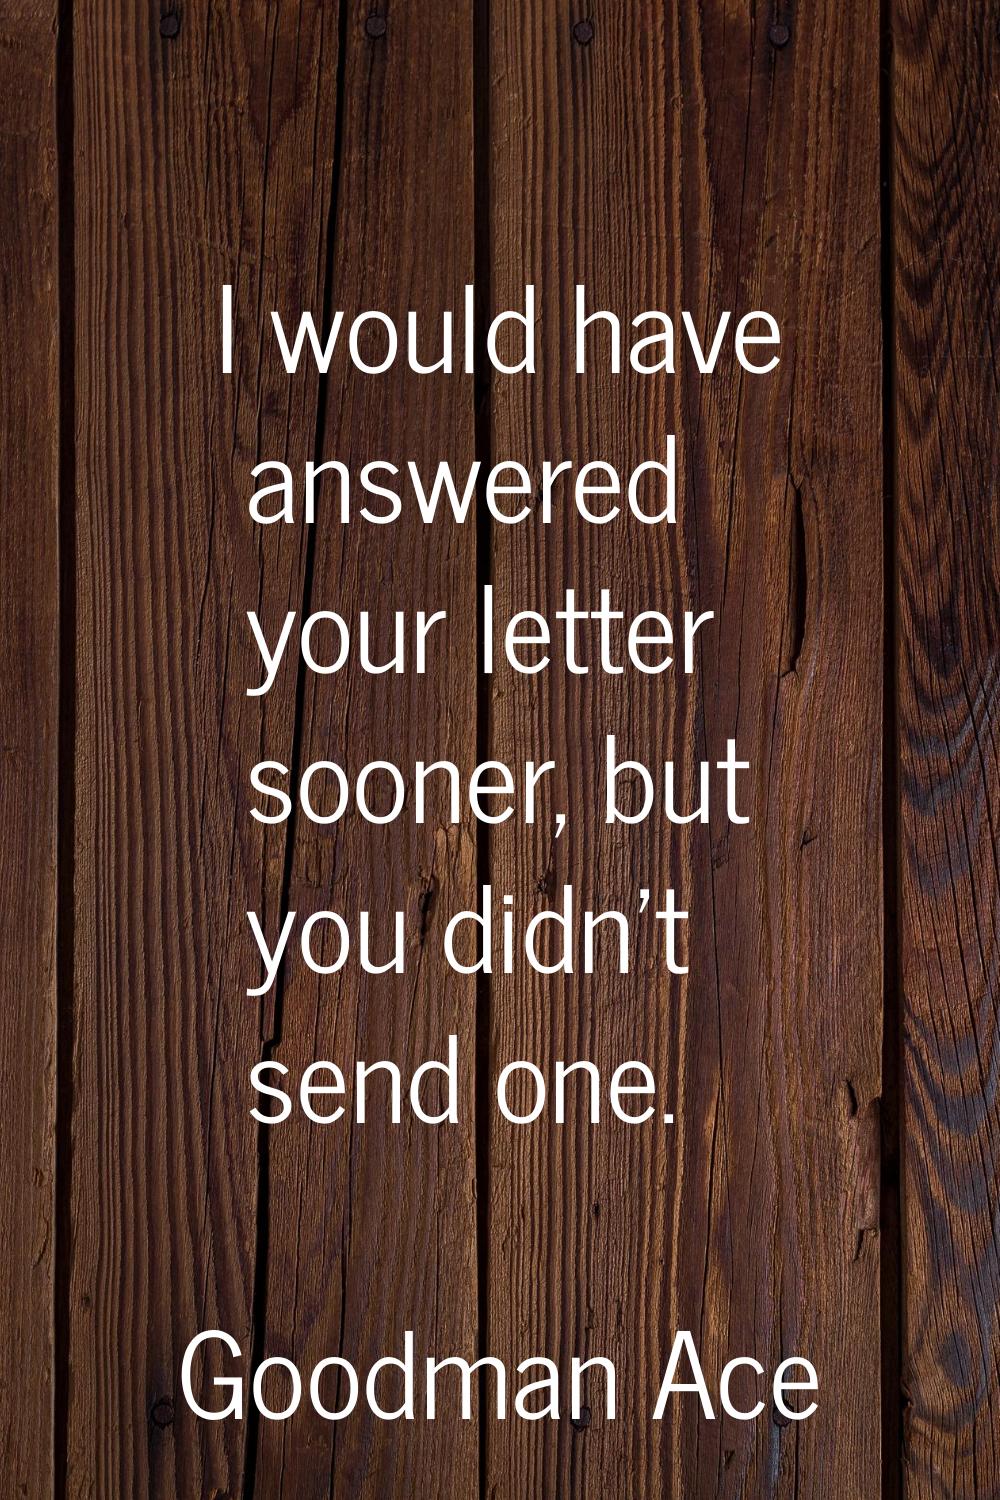 I would have answered your letter sooner, but you didn't send one.